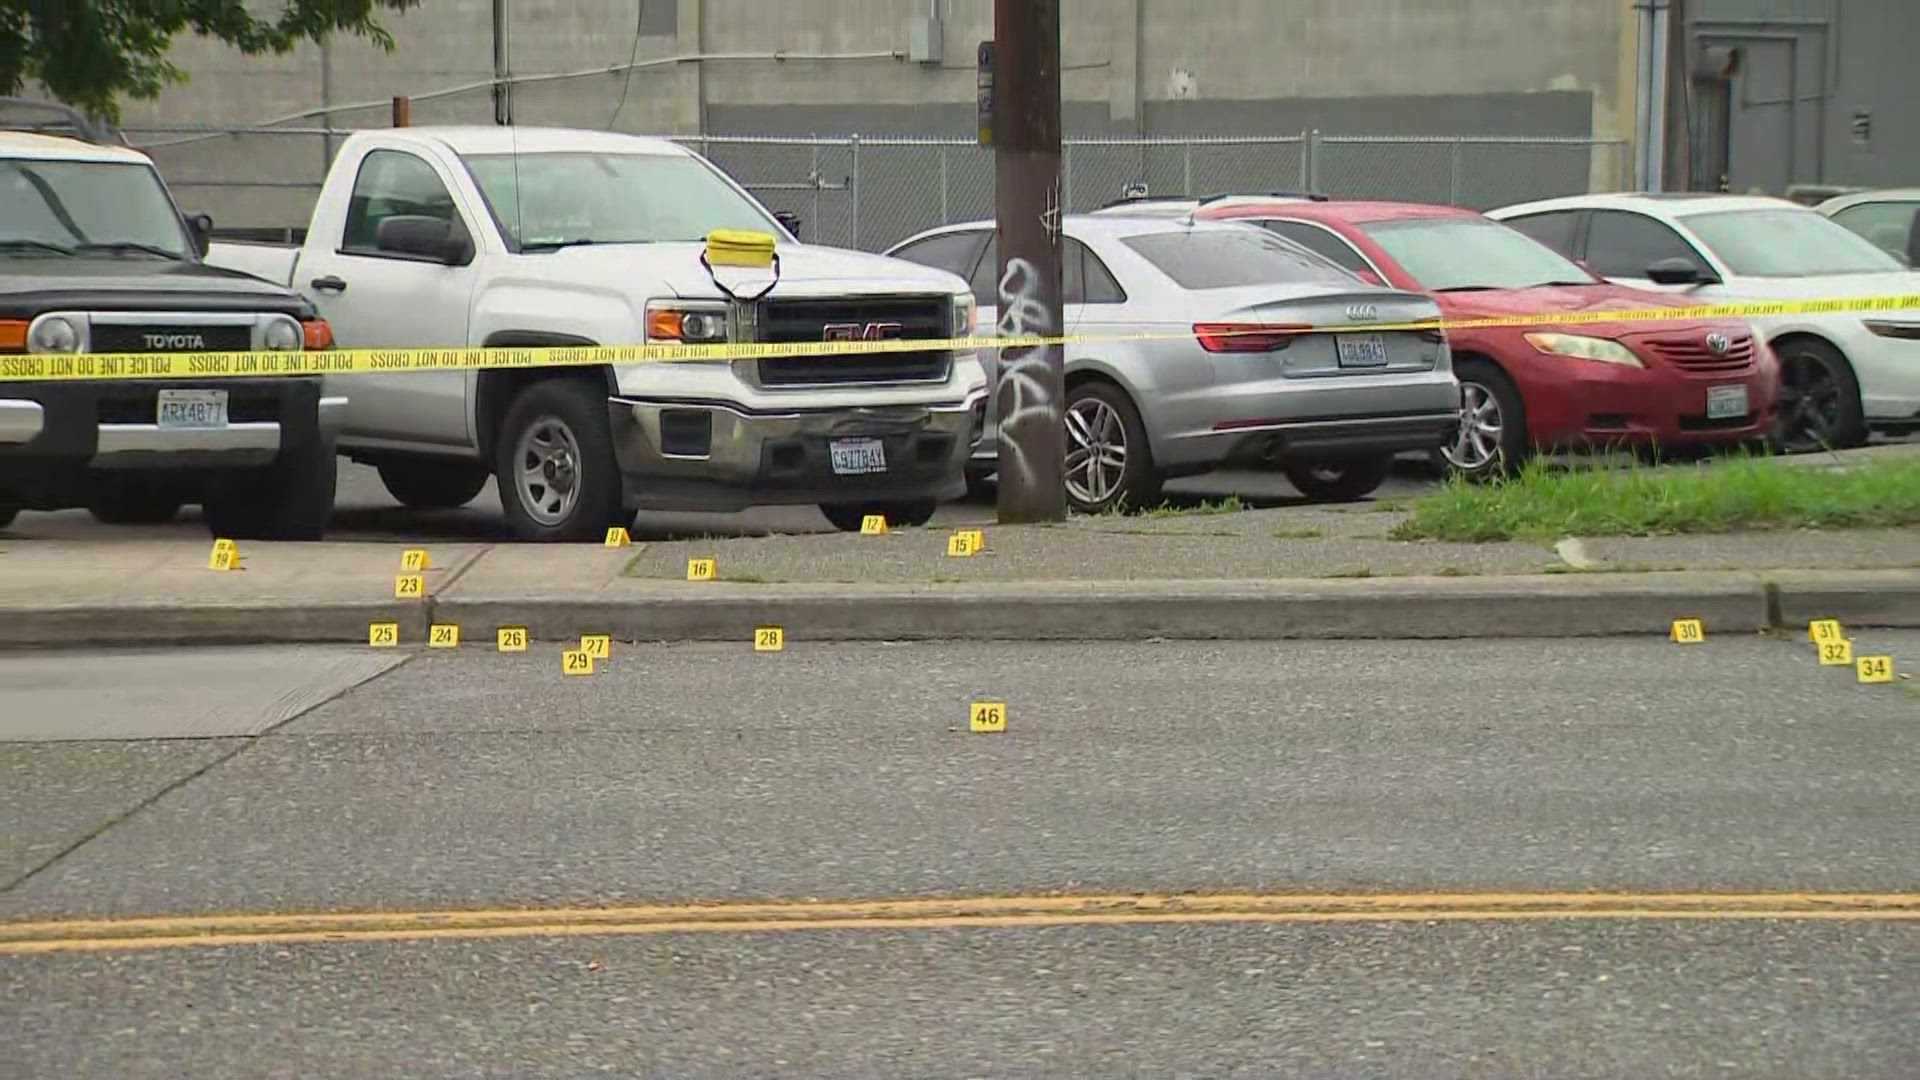 Two people were injured in a shooting early Saturday morning in Seatle's Yesler Terrace neighborhood, according to Seattle police.